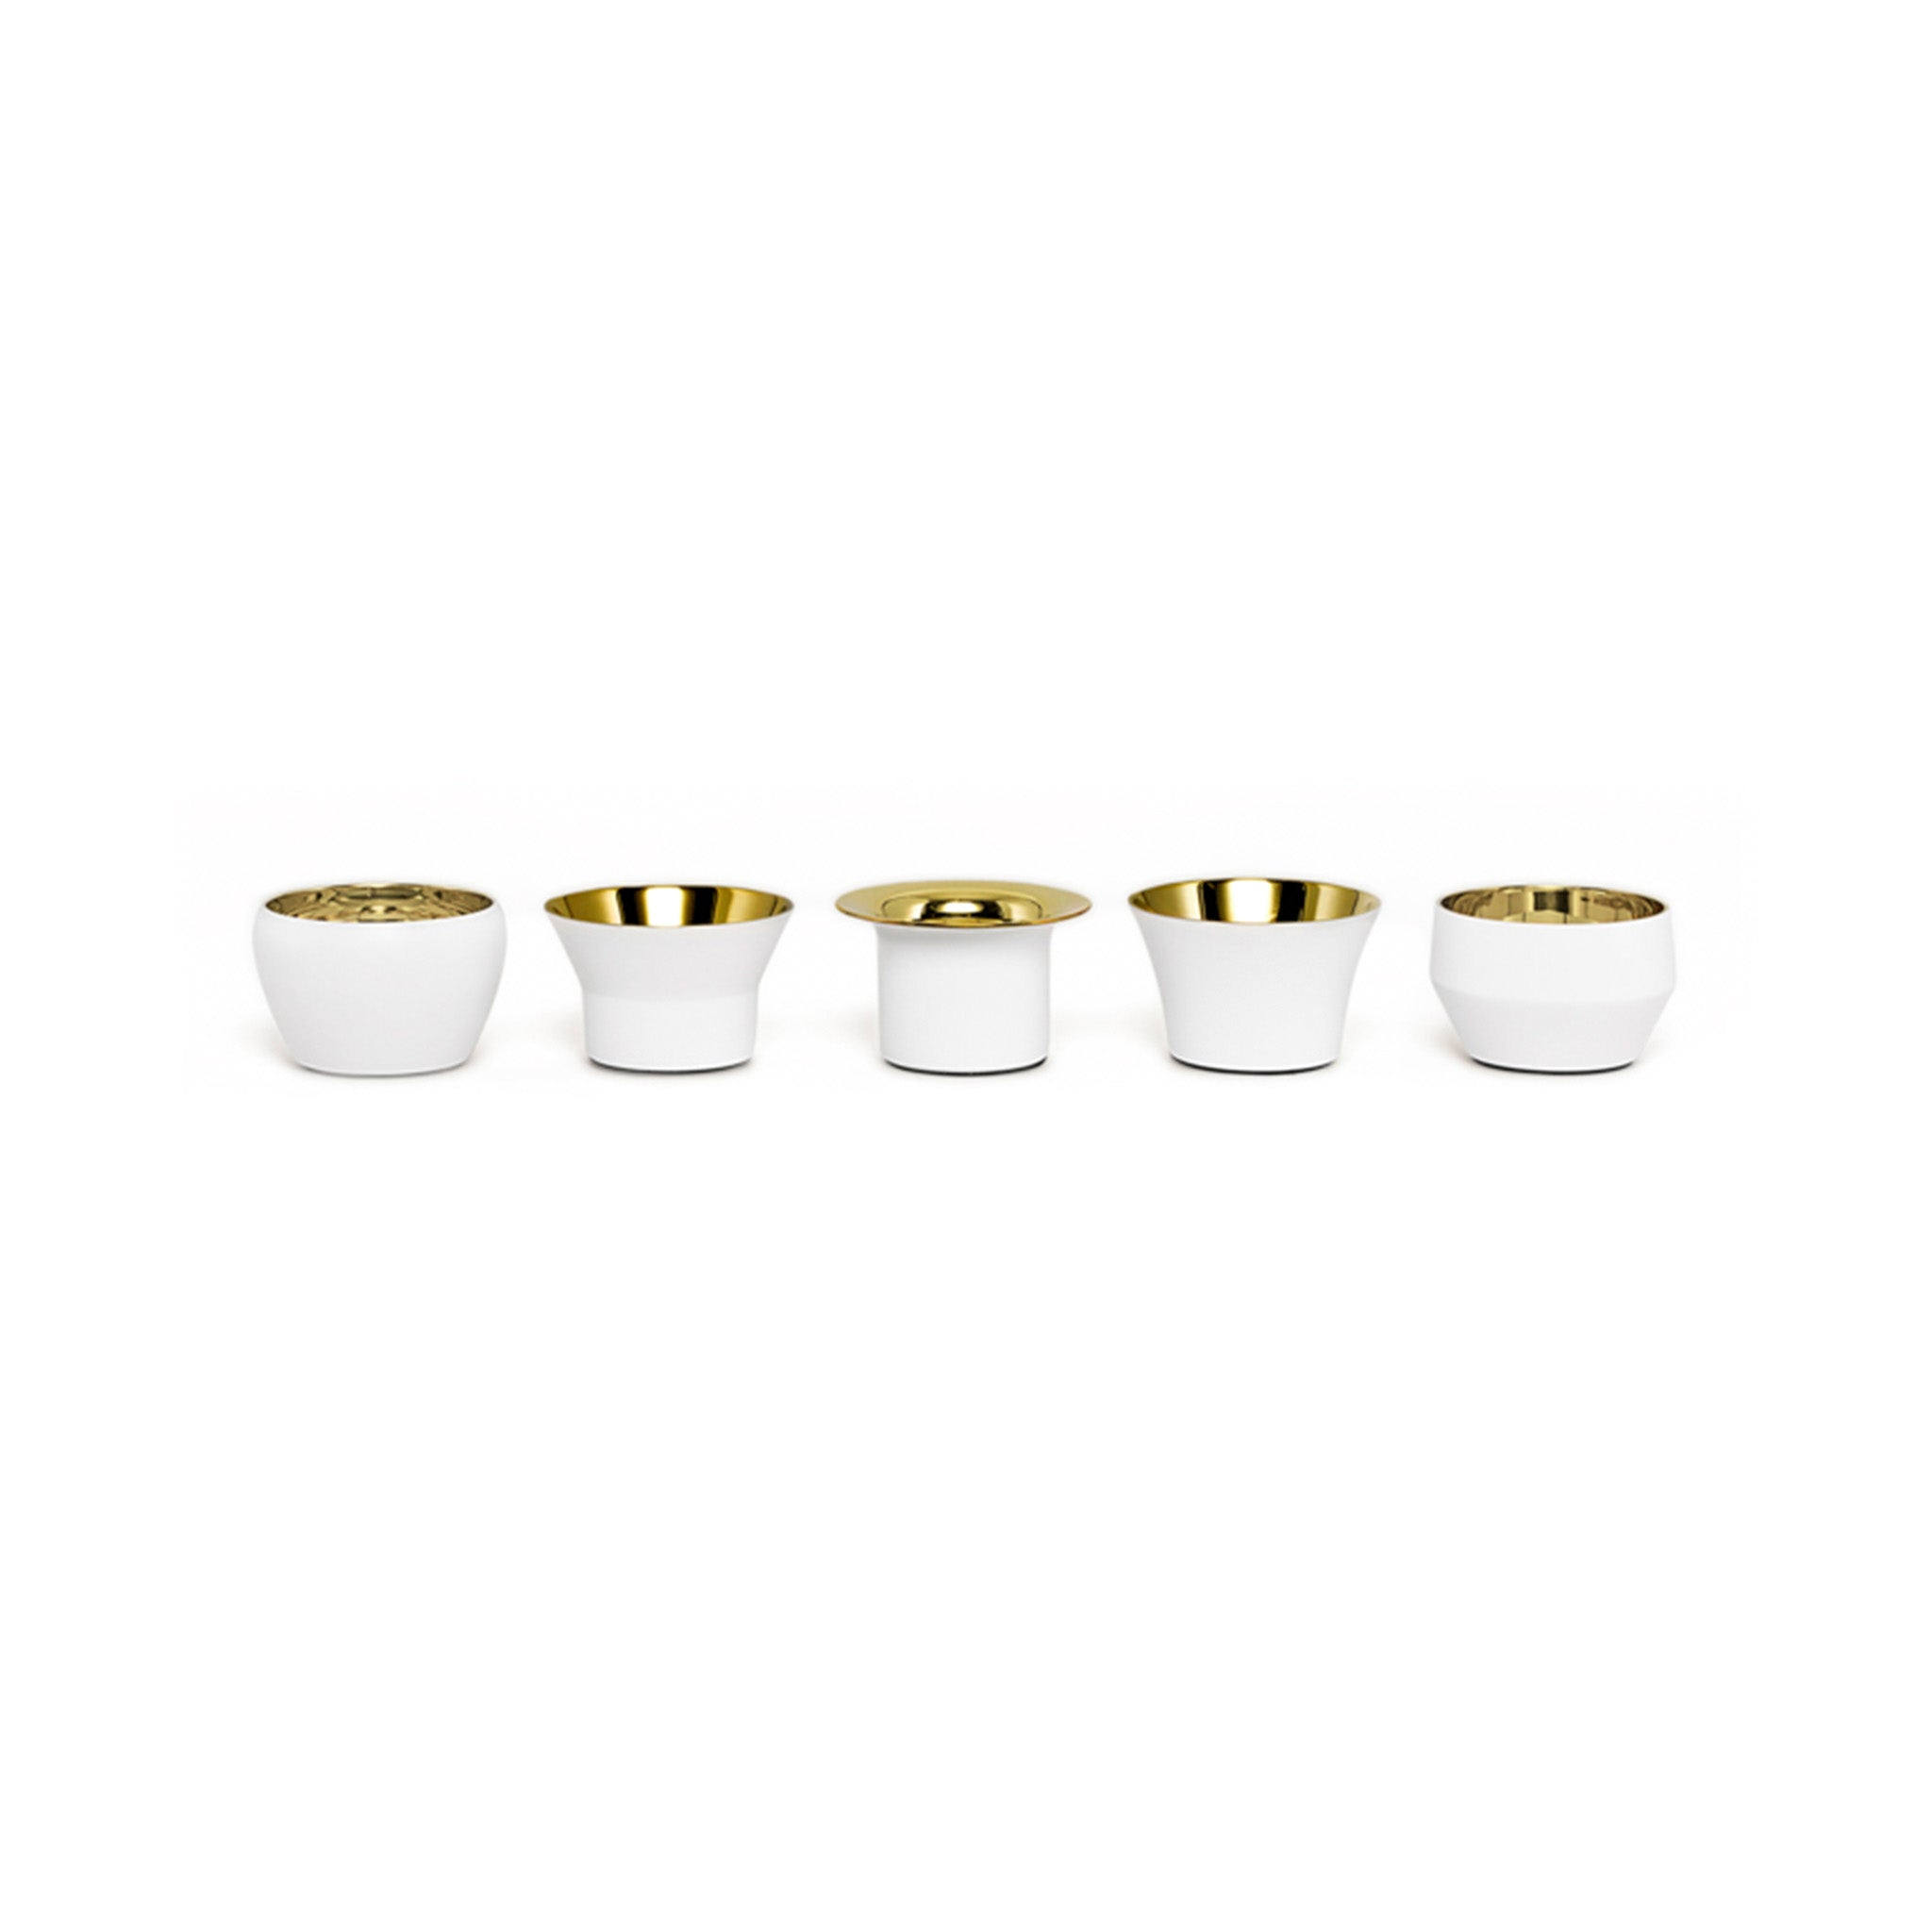 a set of five white and brass tealights by skultuna in a row on a white background